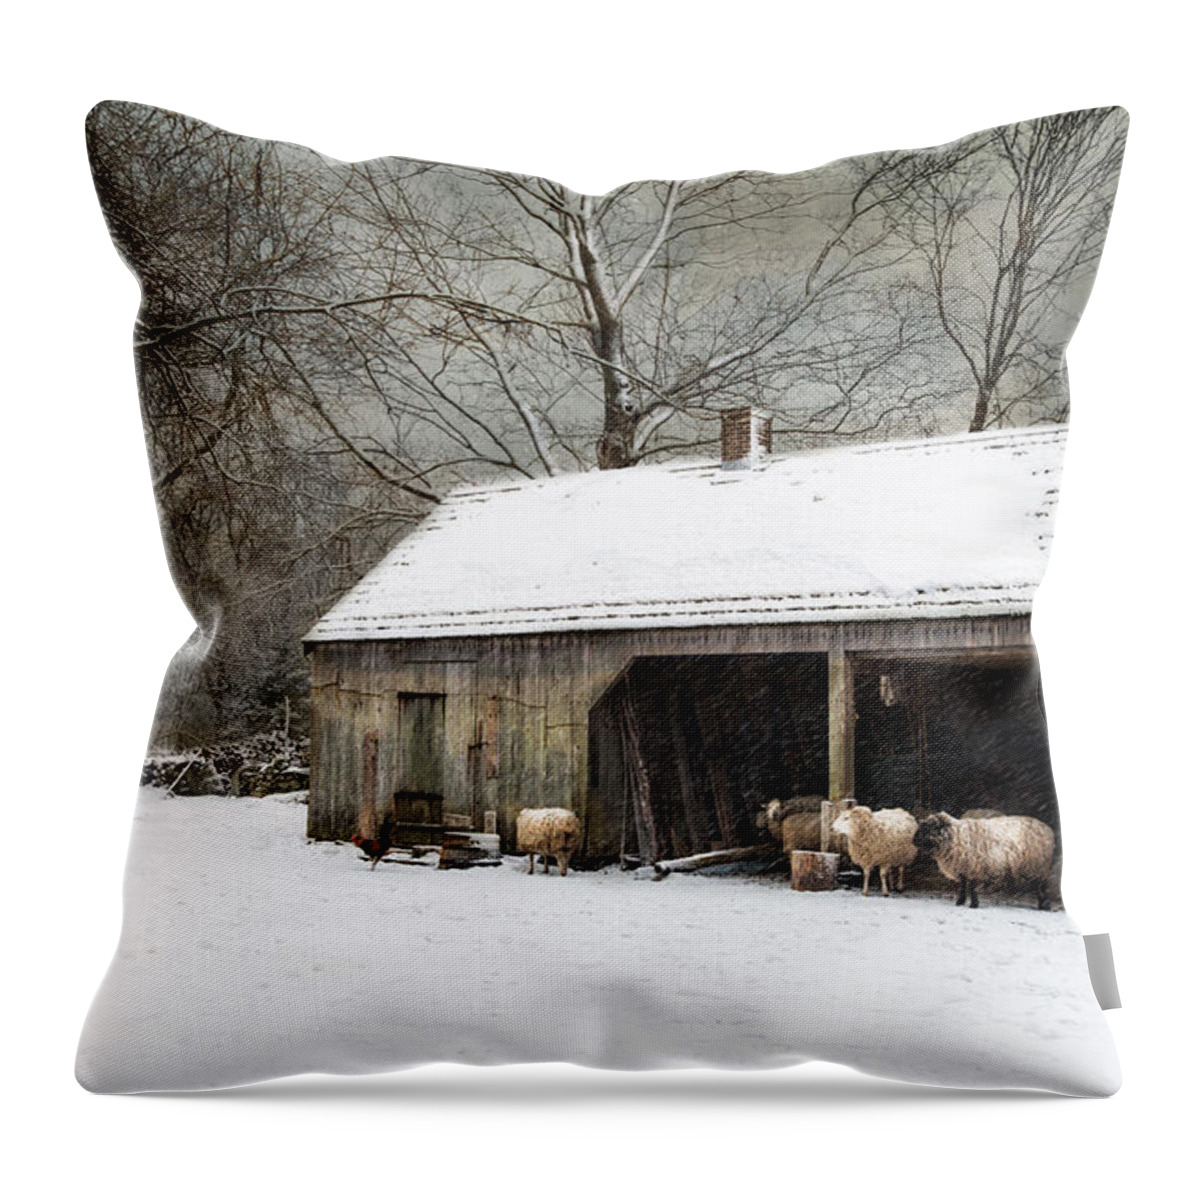 Sheep Throw Pillow featuring the photograph Winter Woolens by Robin-Lee Vieira